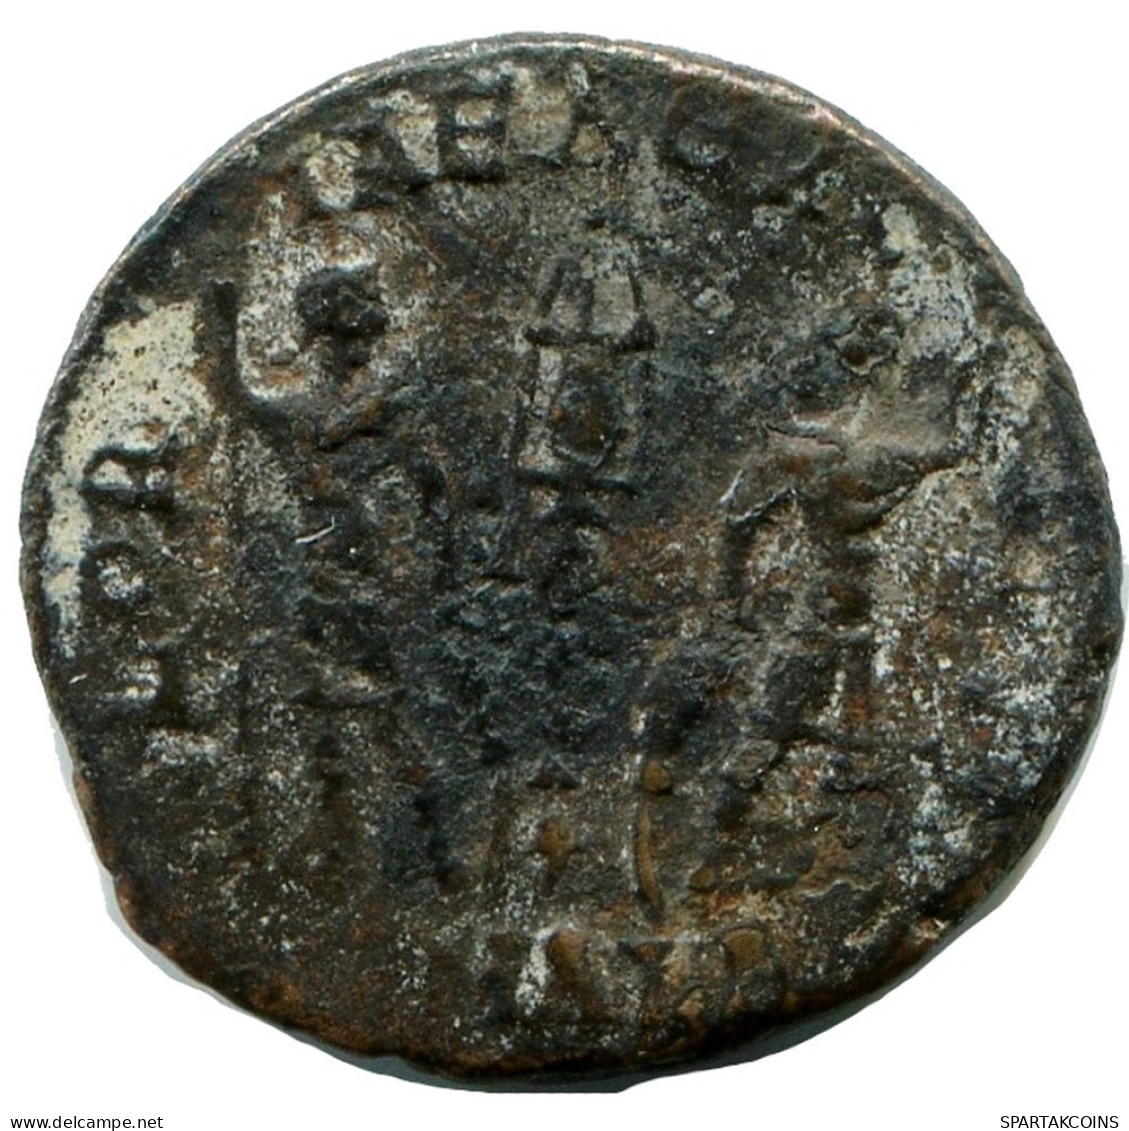 CONSTANS MINTED IN ALEKSANDRIA FOUND IN IHNASYAH HOARD EGYPT #ANC11349.14.D.A - The Christian Empire (307 AD To 363 AD)